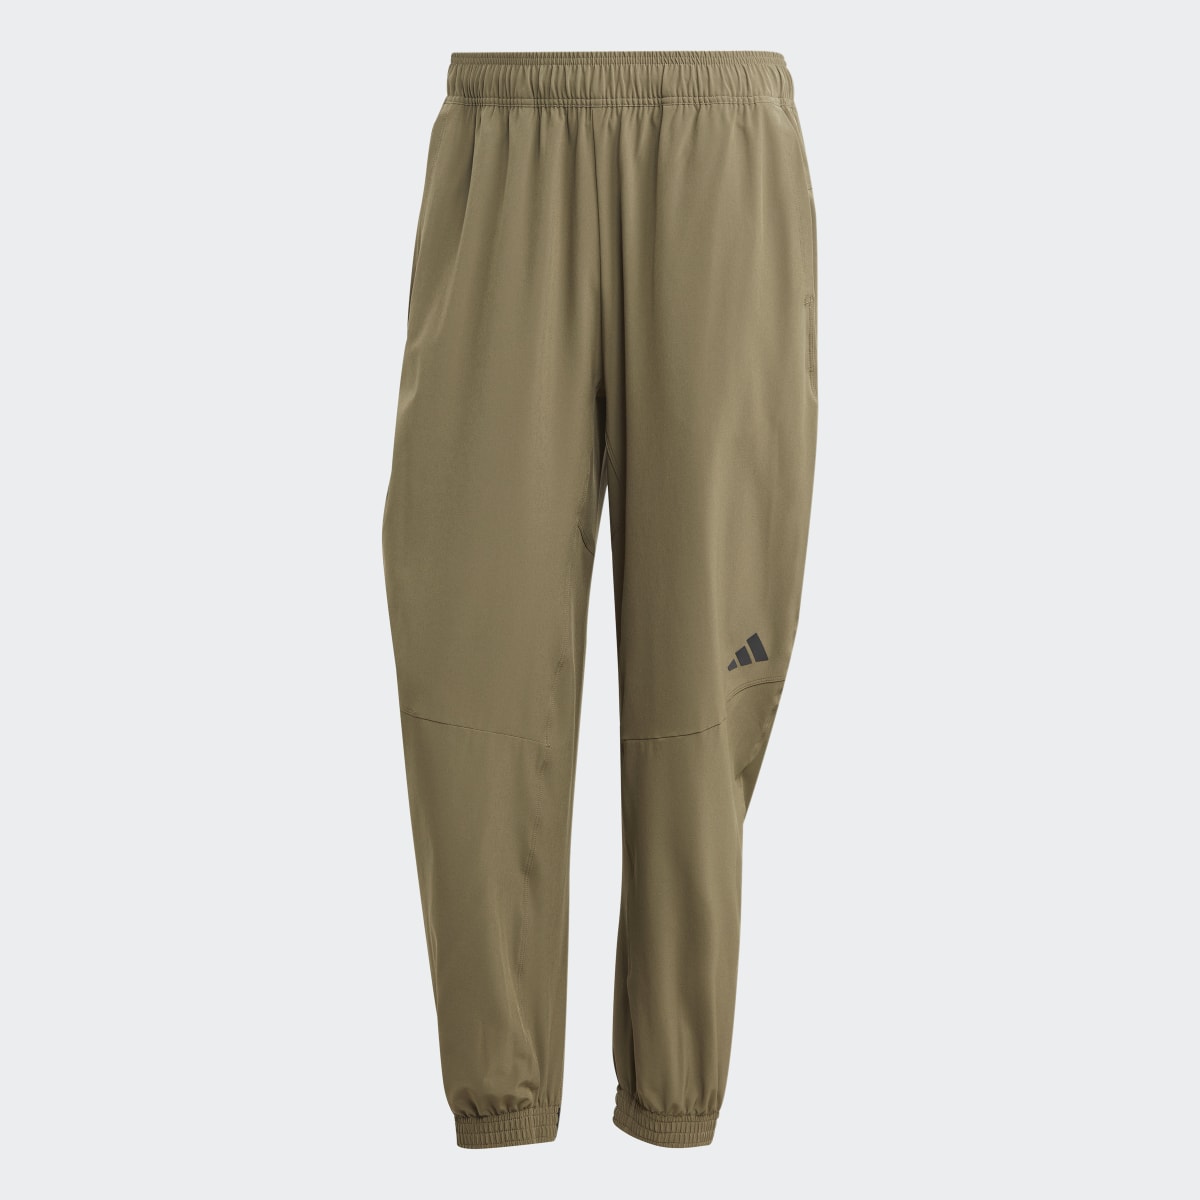 Adidas Designed for Training Pro Series Strength Joggers. 5